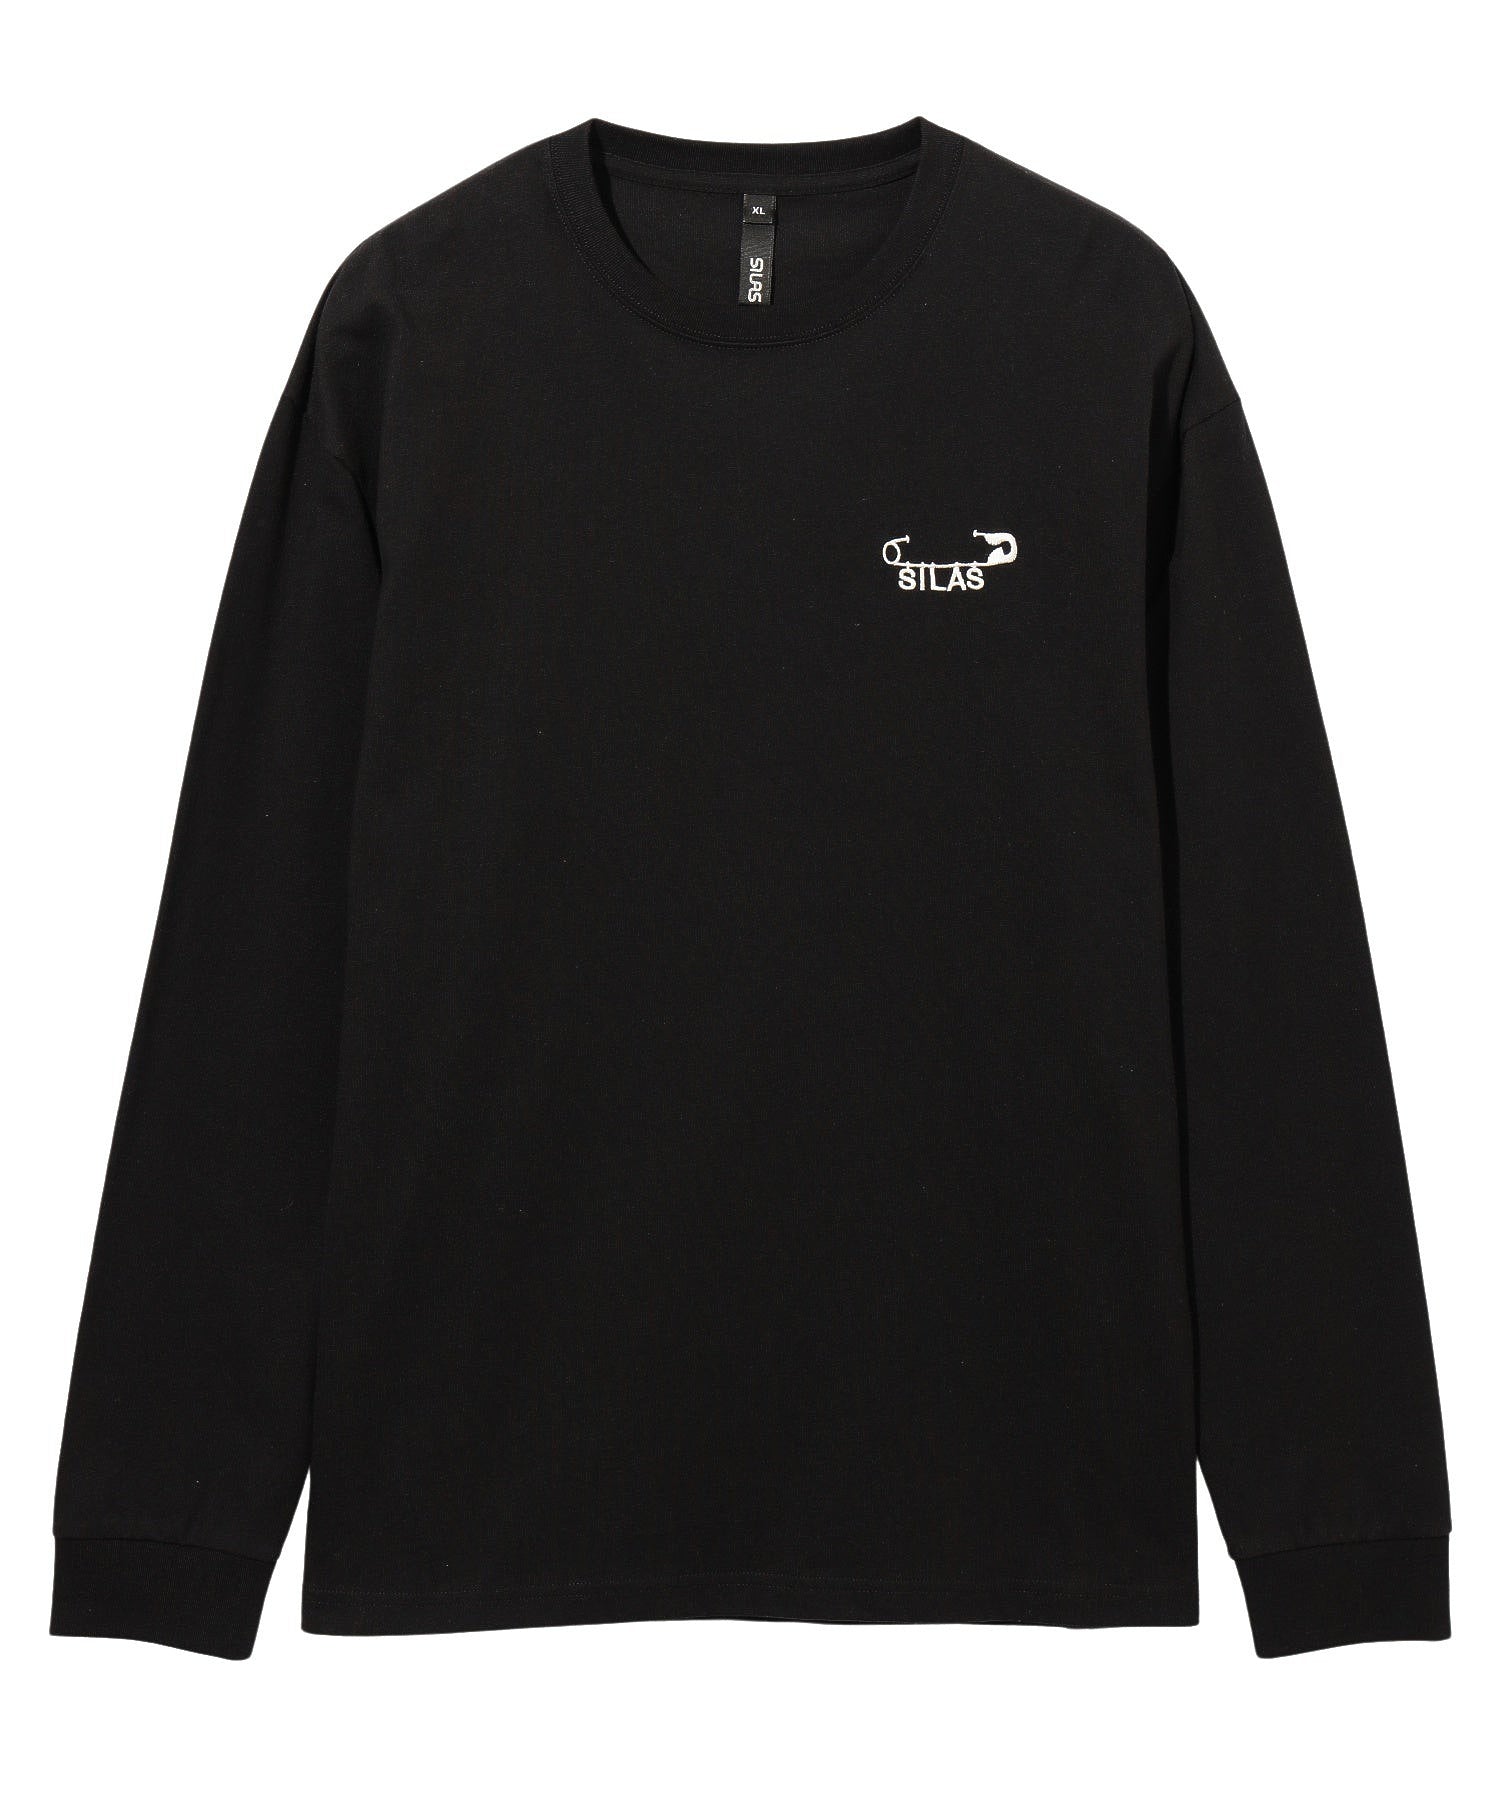 SAFETY PIN L/S TEE SILAS